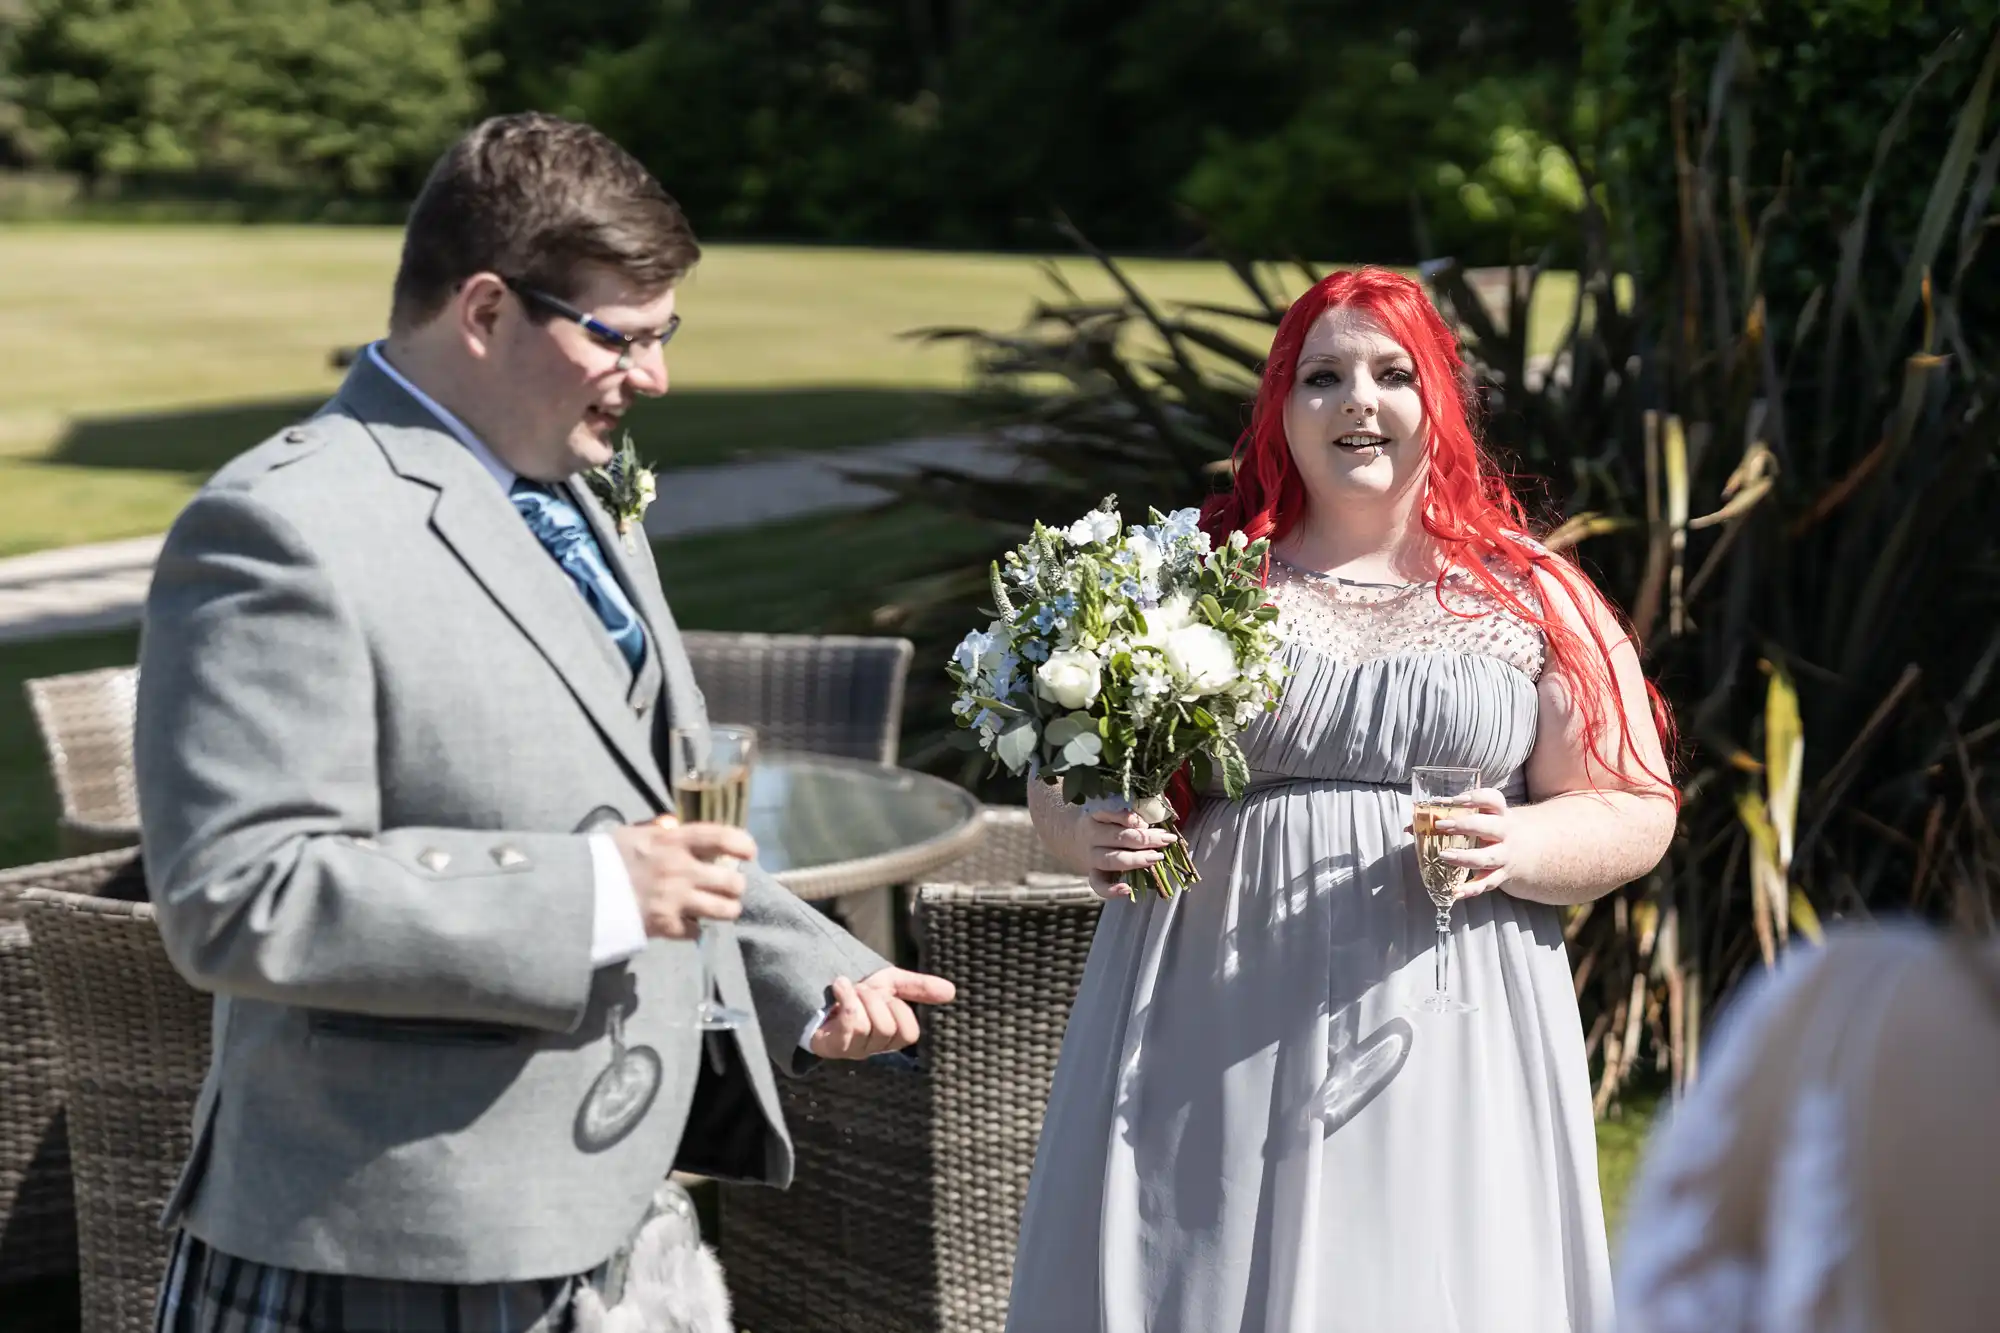 A bride with red hair in a white dress holding a bouquet converses with a man in a gray kilt and vest, both holding glasses, outdoors at a sunny wedding reception.